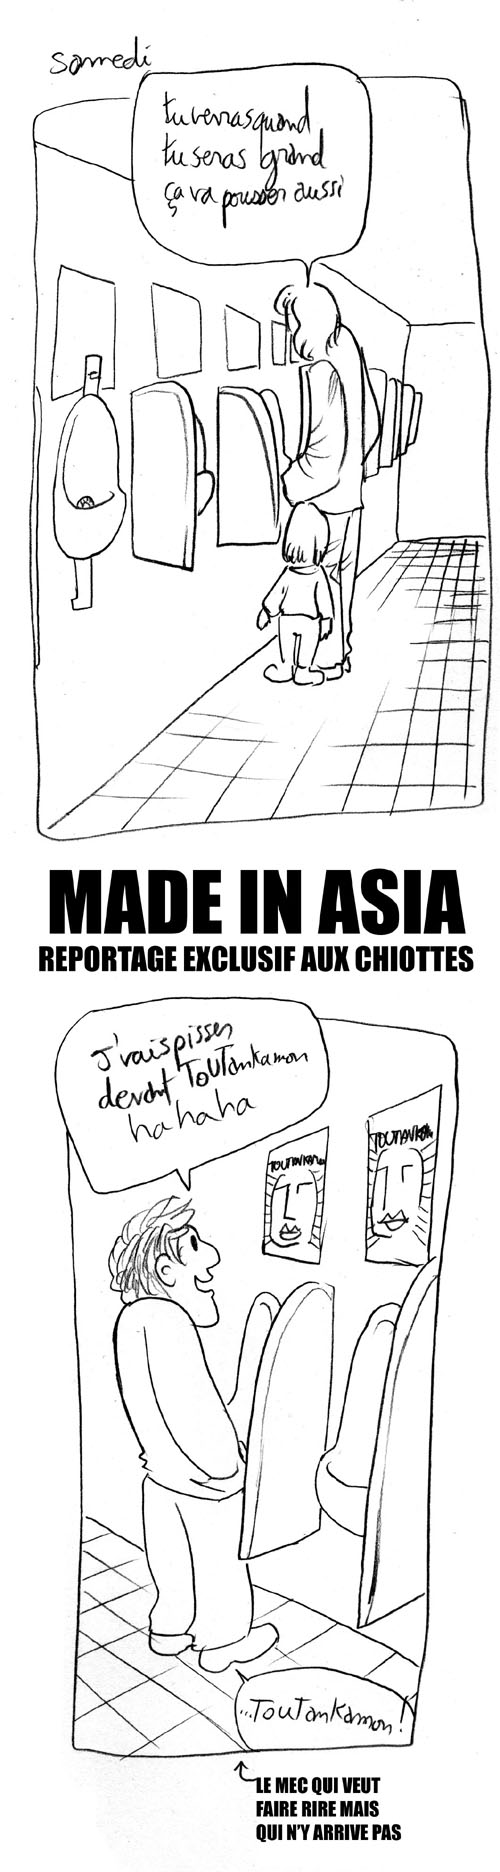 made in asia aux chiottes